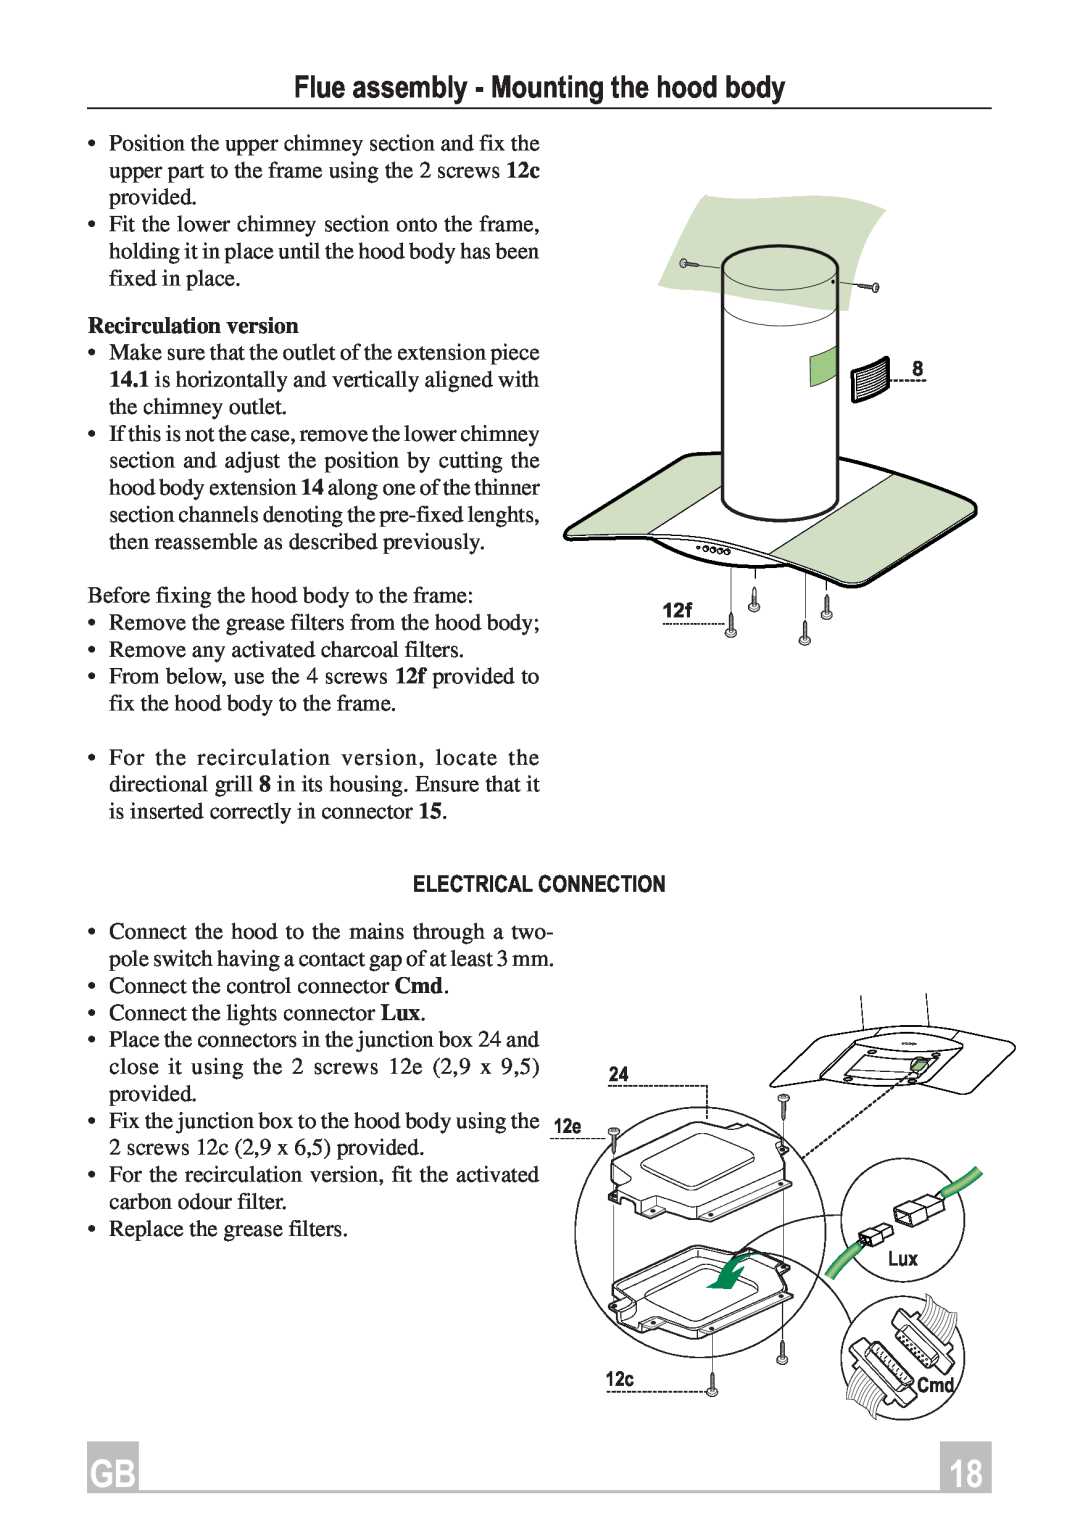 Smeg KSEIV96X instruction manual Flue assembly - Mounting the hood body, Recirculation version, Electrical Connection 